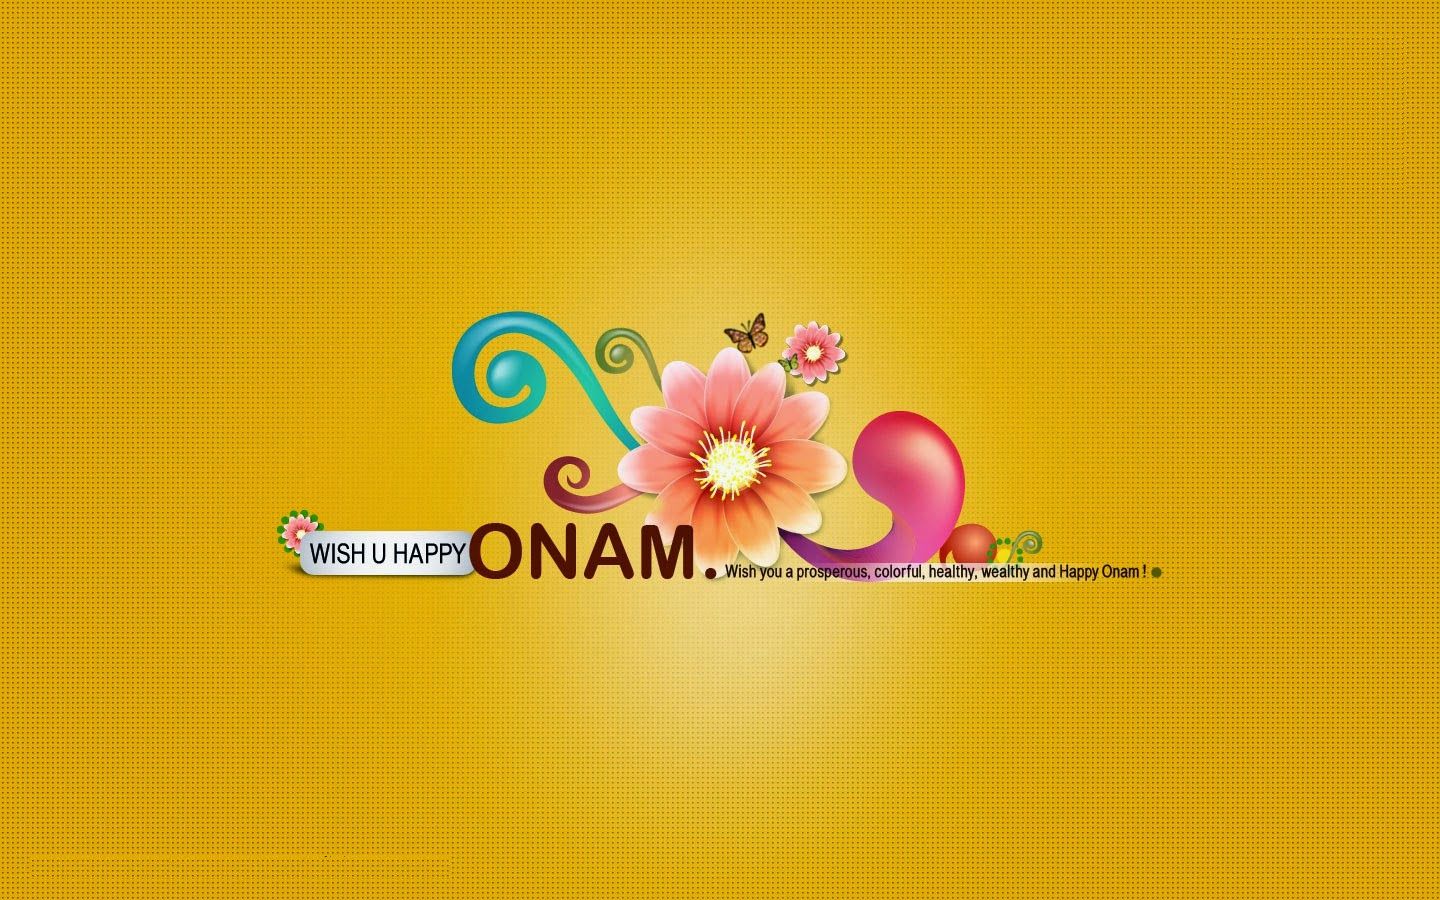 Onam Images With Greetings - Barberton Daisy , HD Wallpaper & Backgrounds